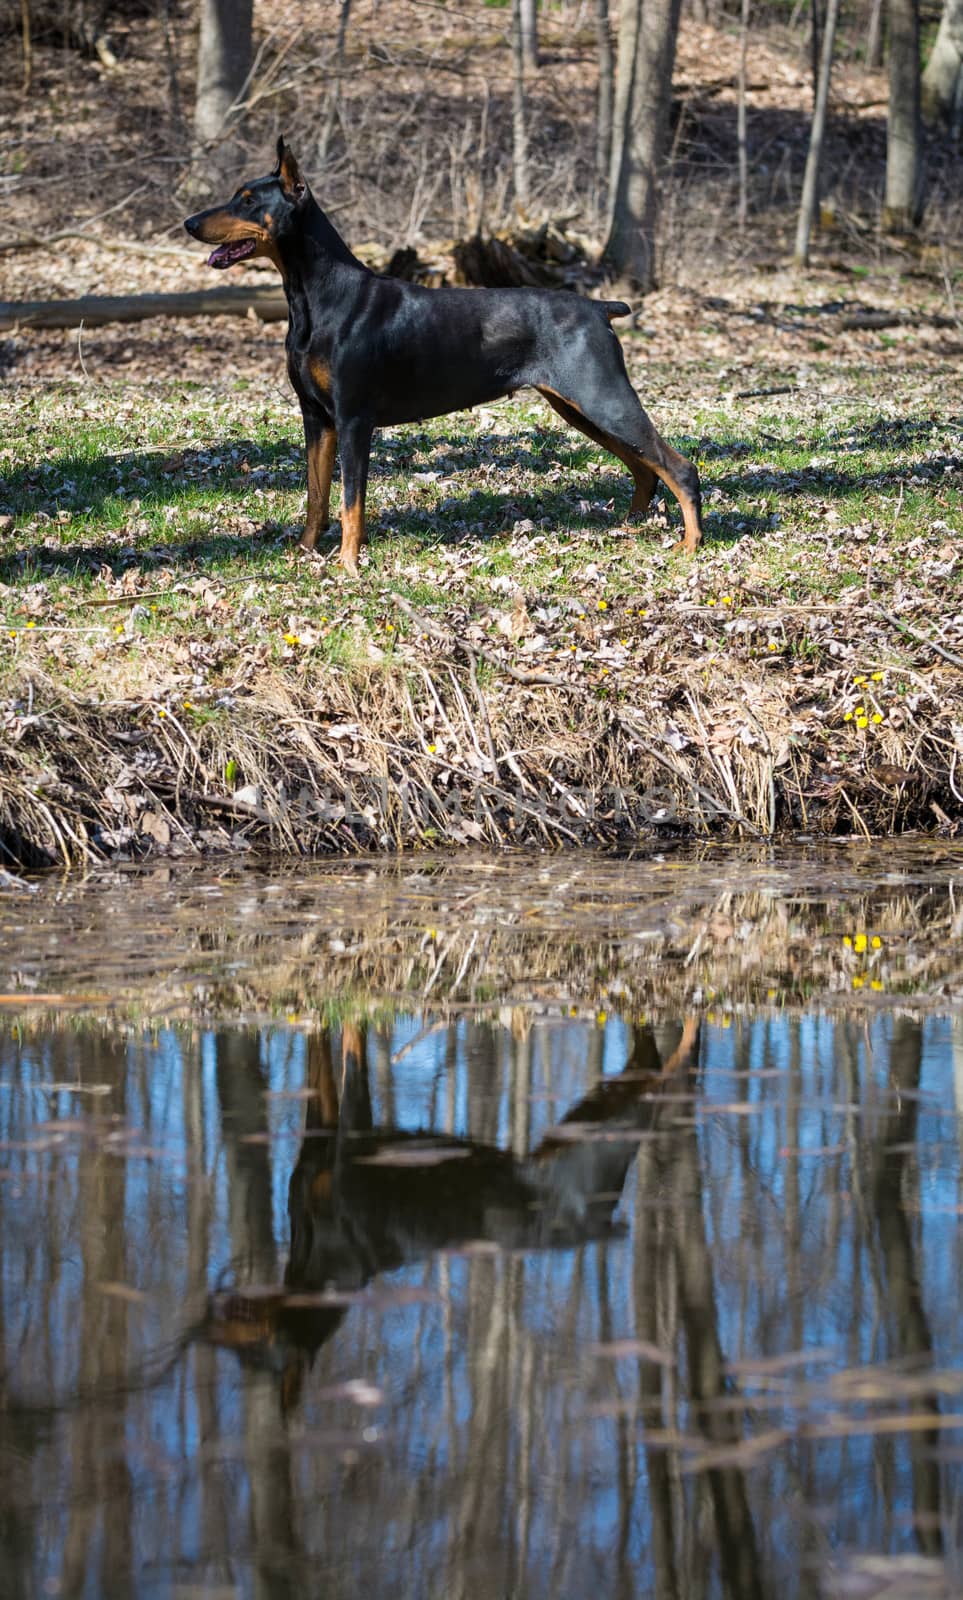 doberman pinscher standing by waters edge with reflection